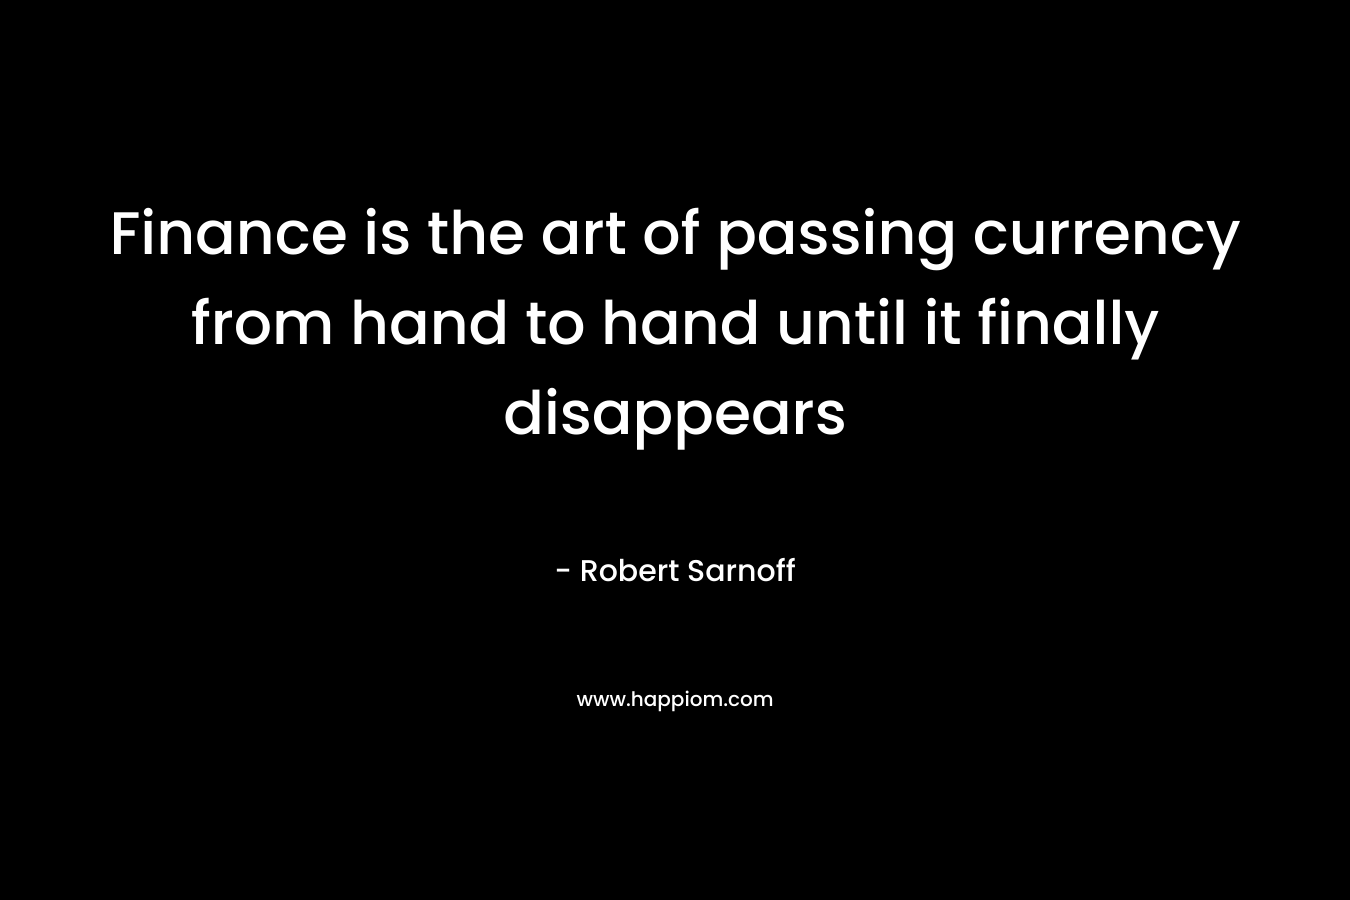 Finance is the art of passing currency from hand to hand until it finally disappears – Robert Sarnoff